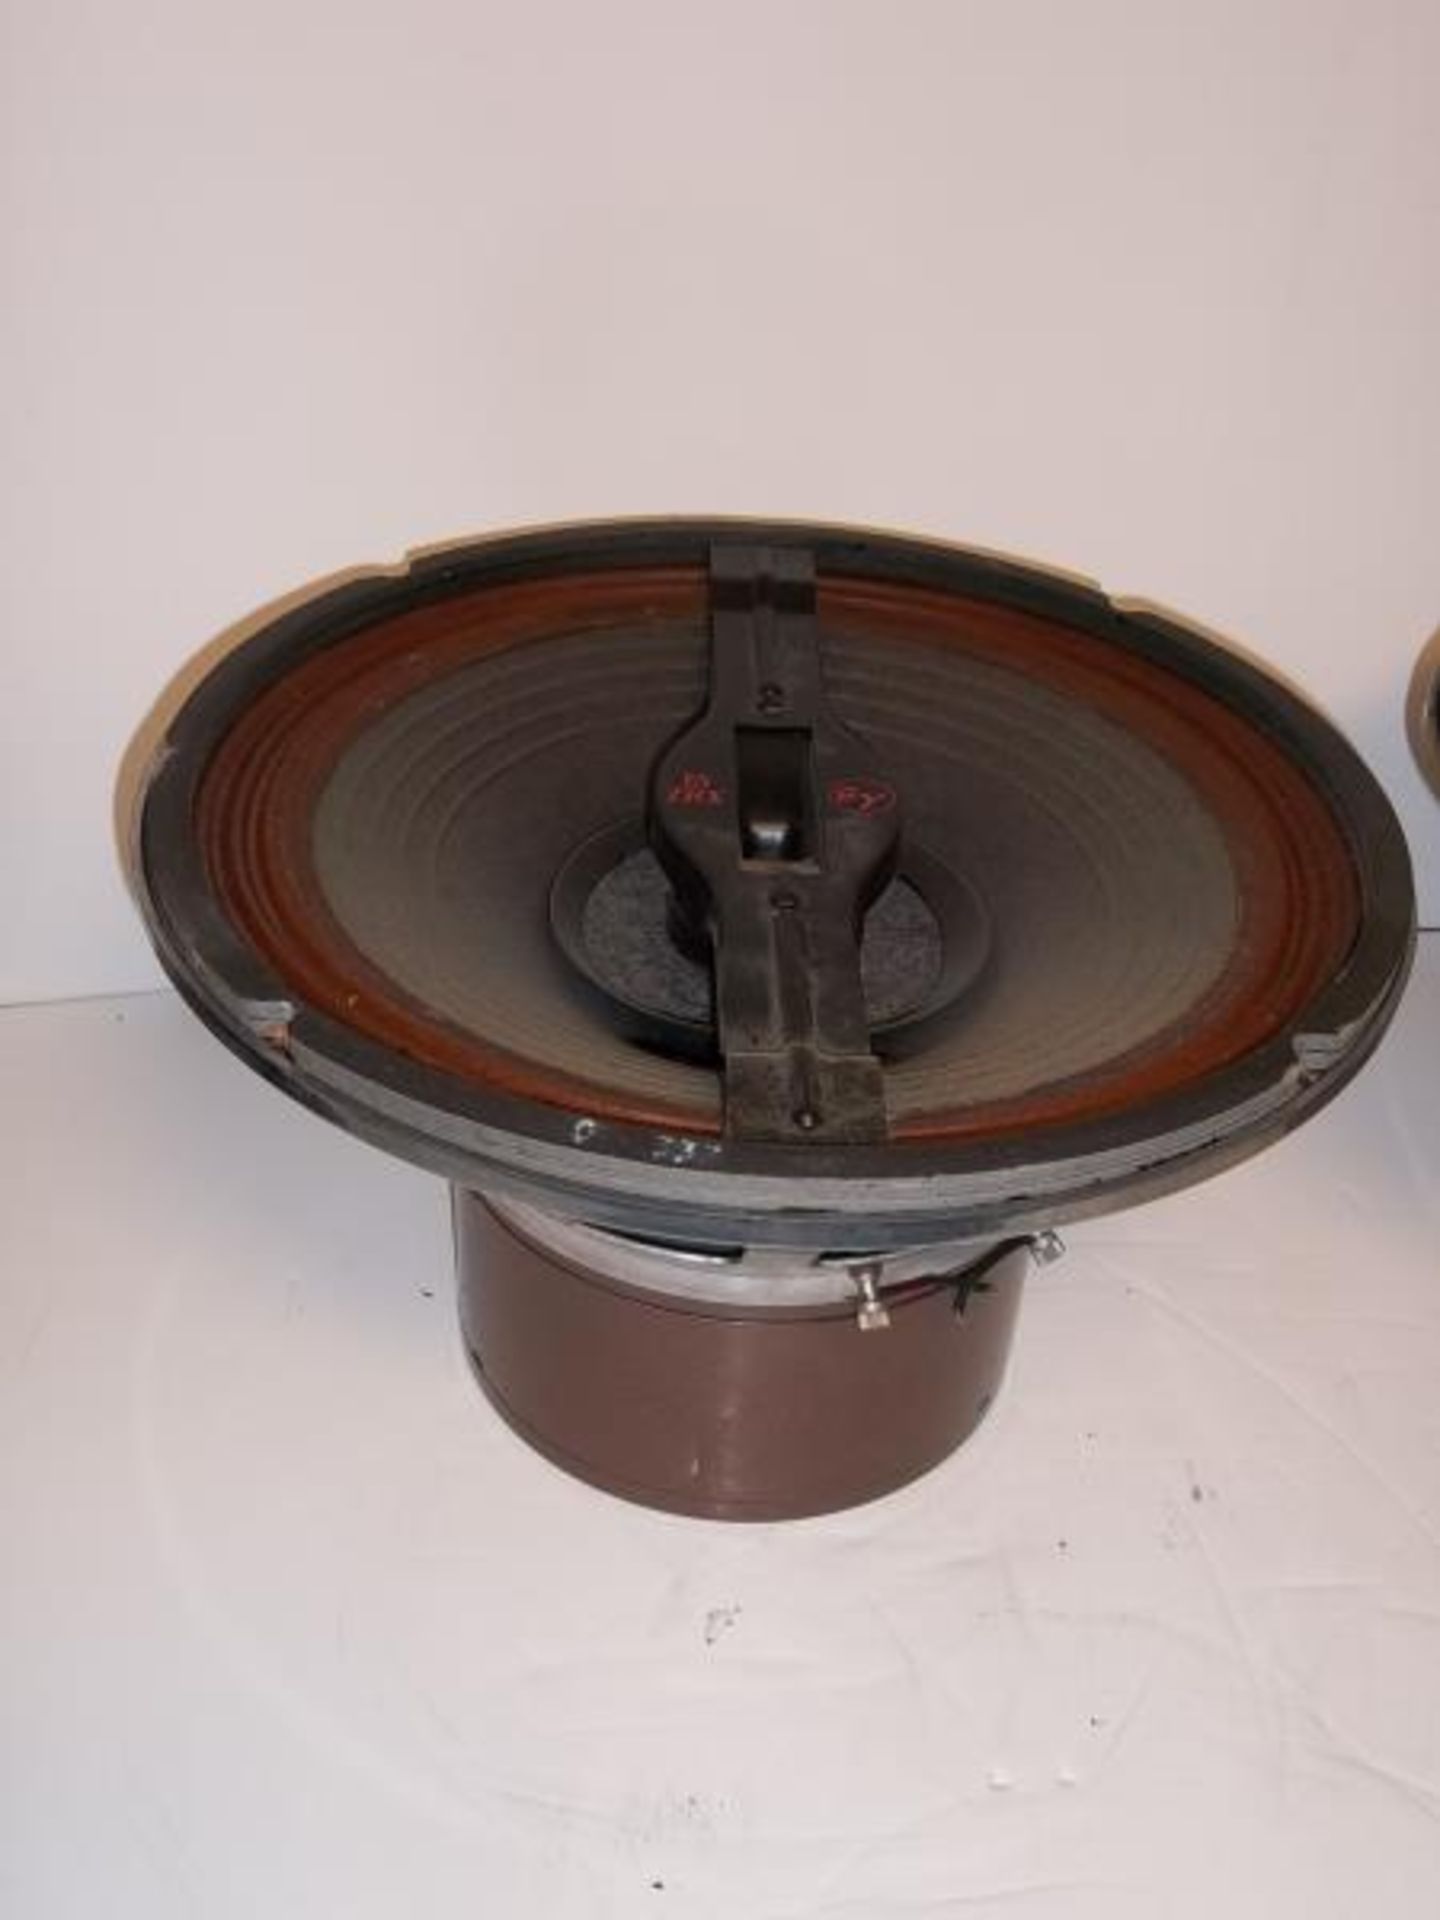 2 EV loud speakers, 15TRX, 15", one serial #841, cones are very dirty, cross chrome supports are - Image 7 of 7